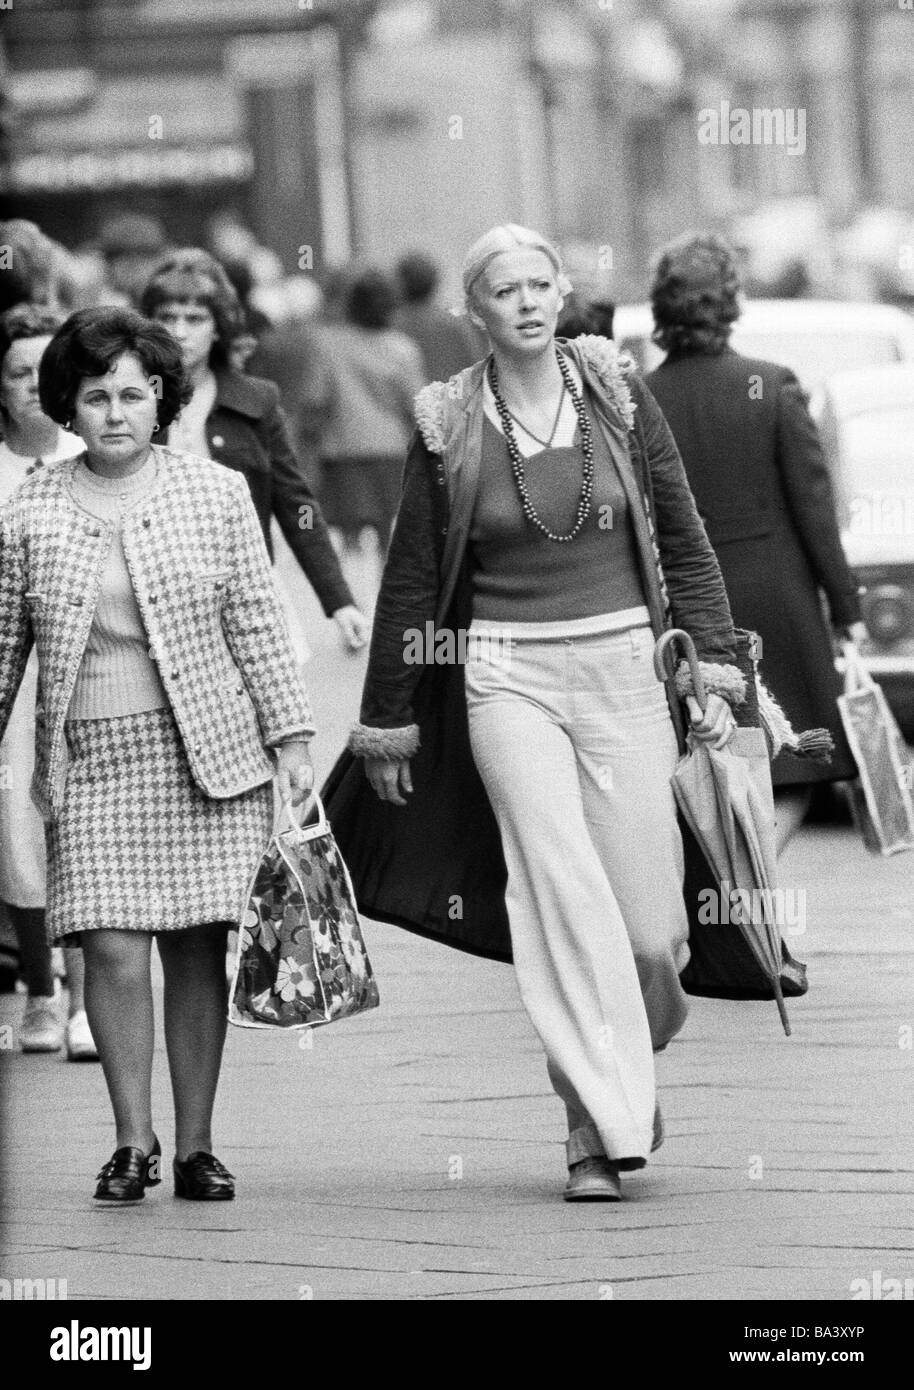 Seventies, black and white photo, people, young woman, aged 30 to 40 years,woman, aged 40 to 50 years, pulli, jacket, trousers, female suit, stroll along the pedestrian zone, shopping, shopping bag, umbrella, freetime Stock Photo